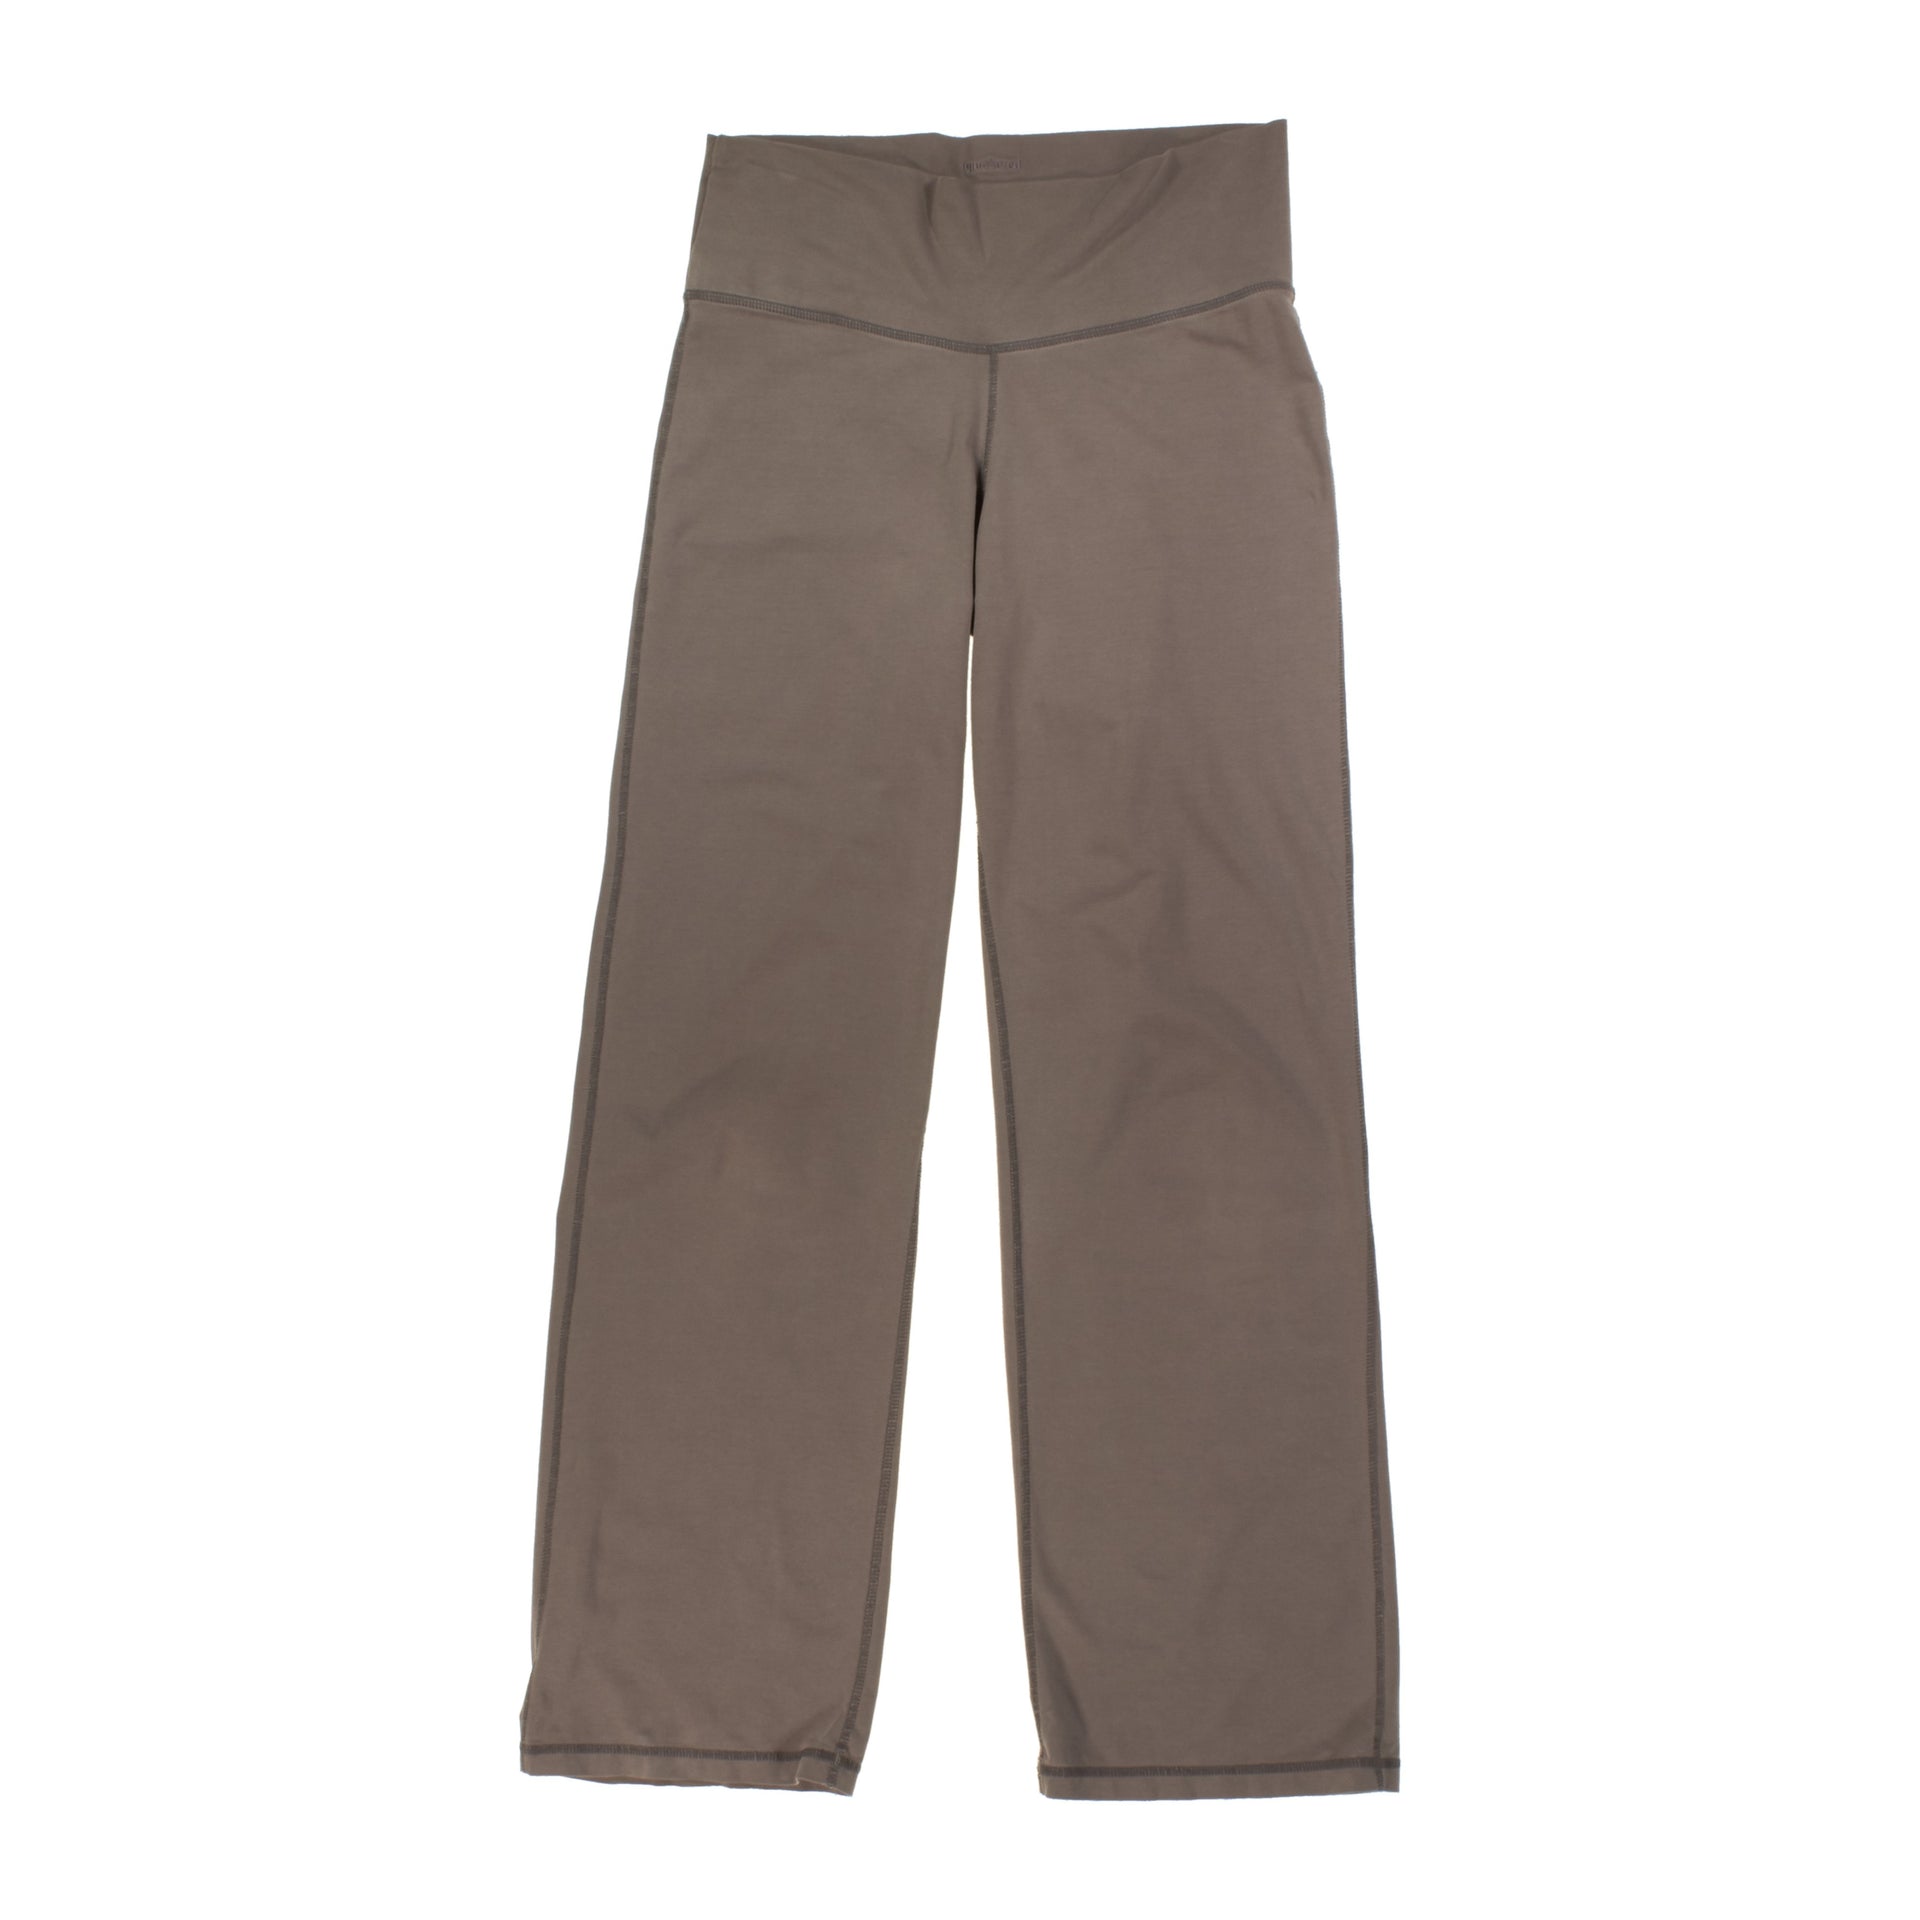 Patagonia Serenity Tight - Women's - Clothing